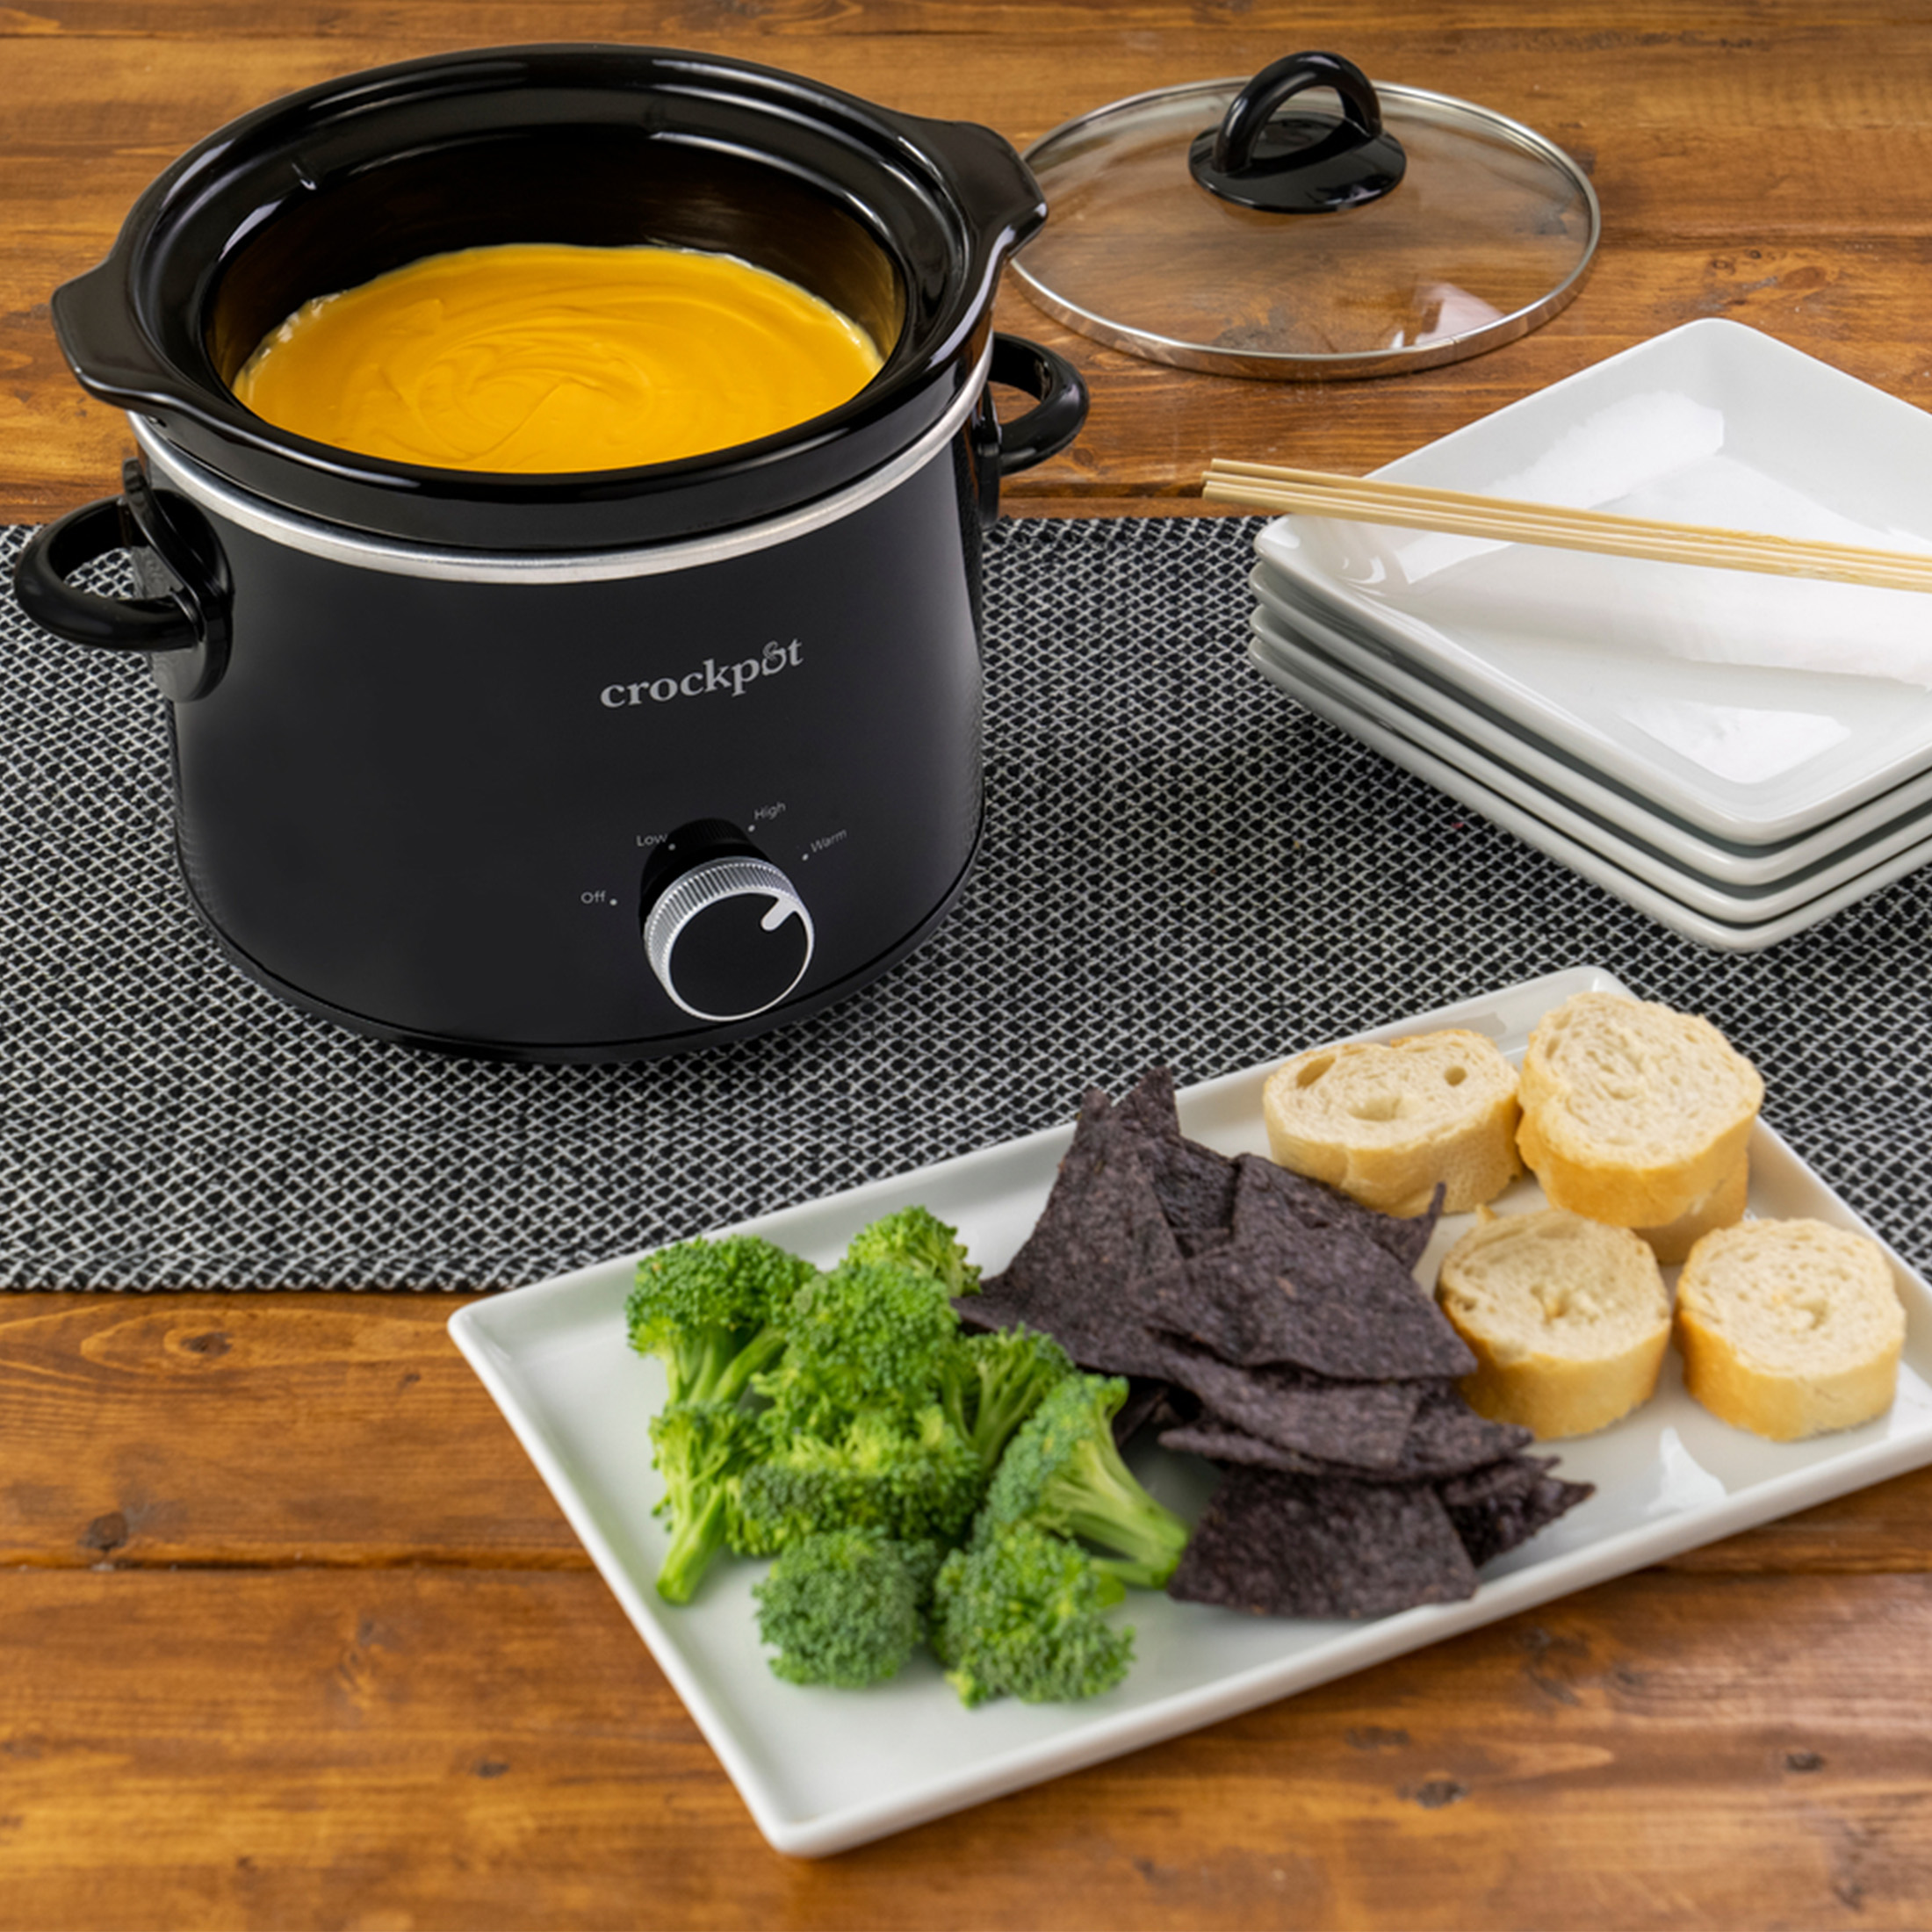 Crockpot™ 2-Quart Classic Slow Cooker, Small Slow Cooker, Black - image 4 of 5